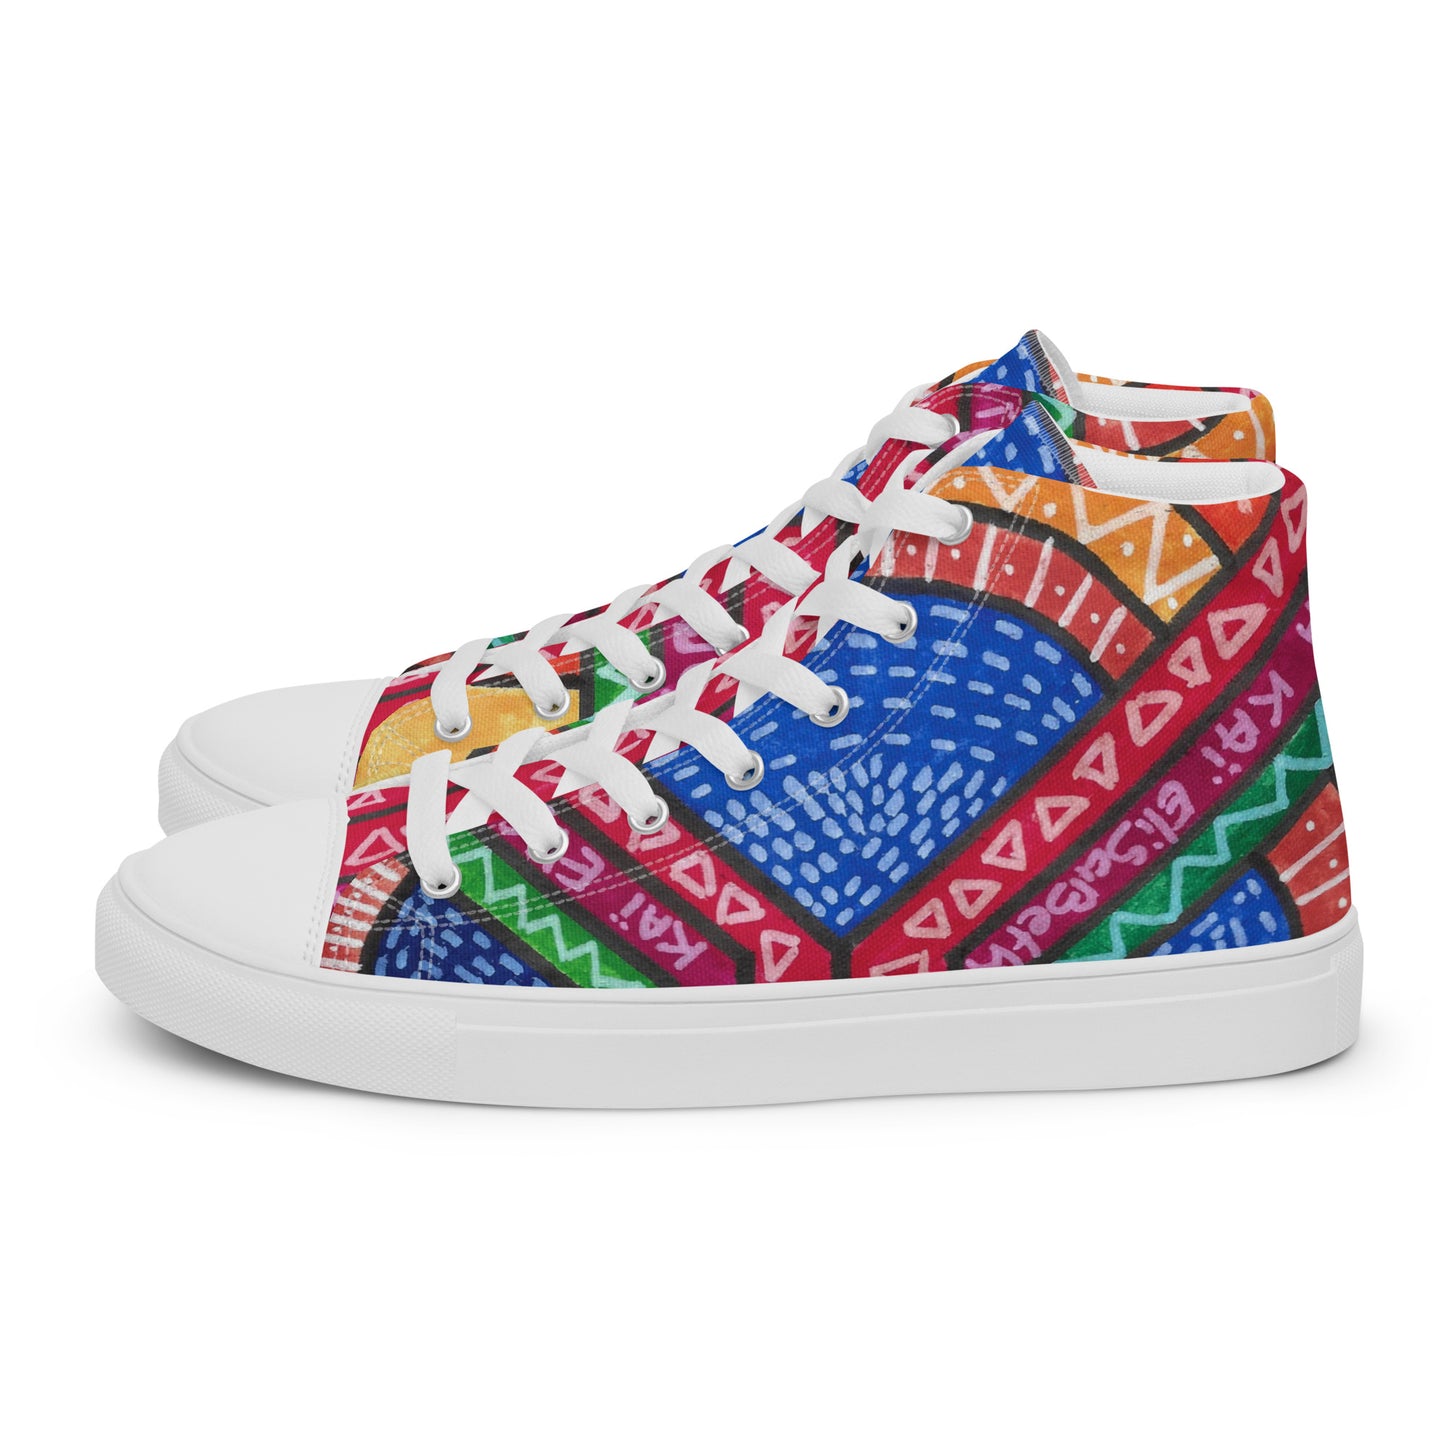 TIYI - Men's high-top canvas trainers